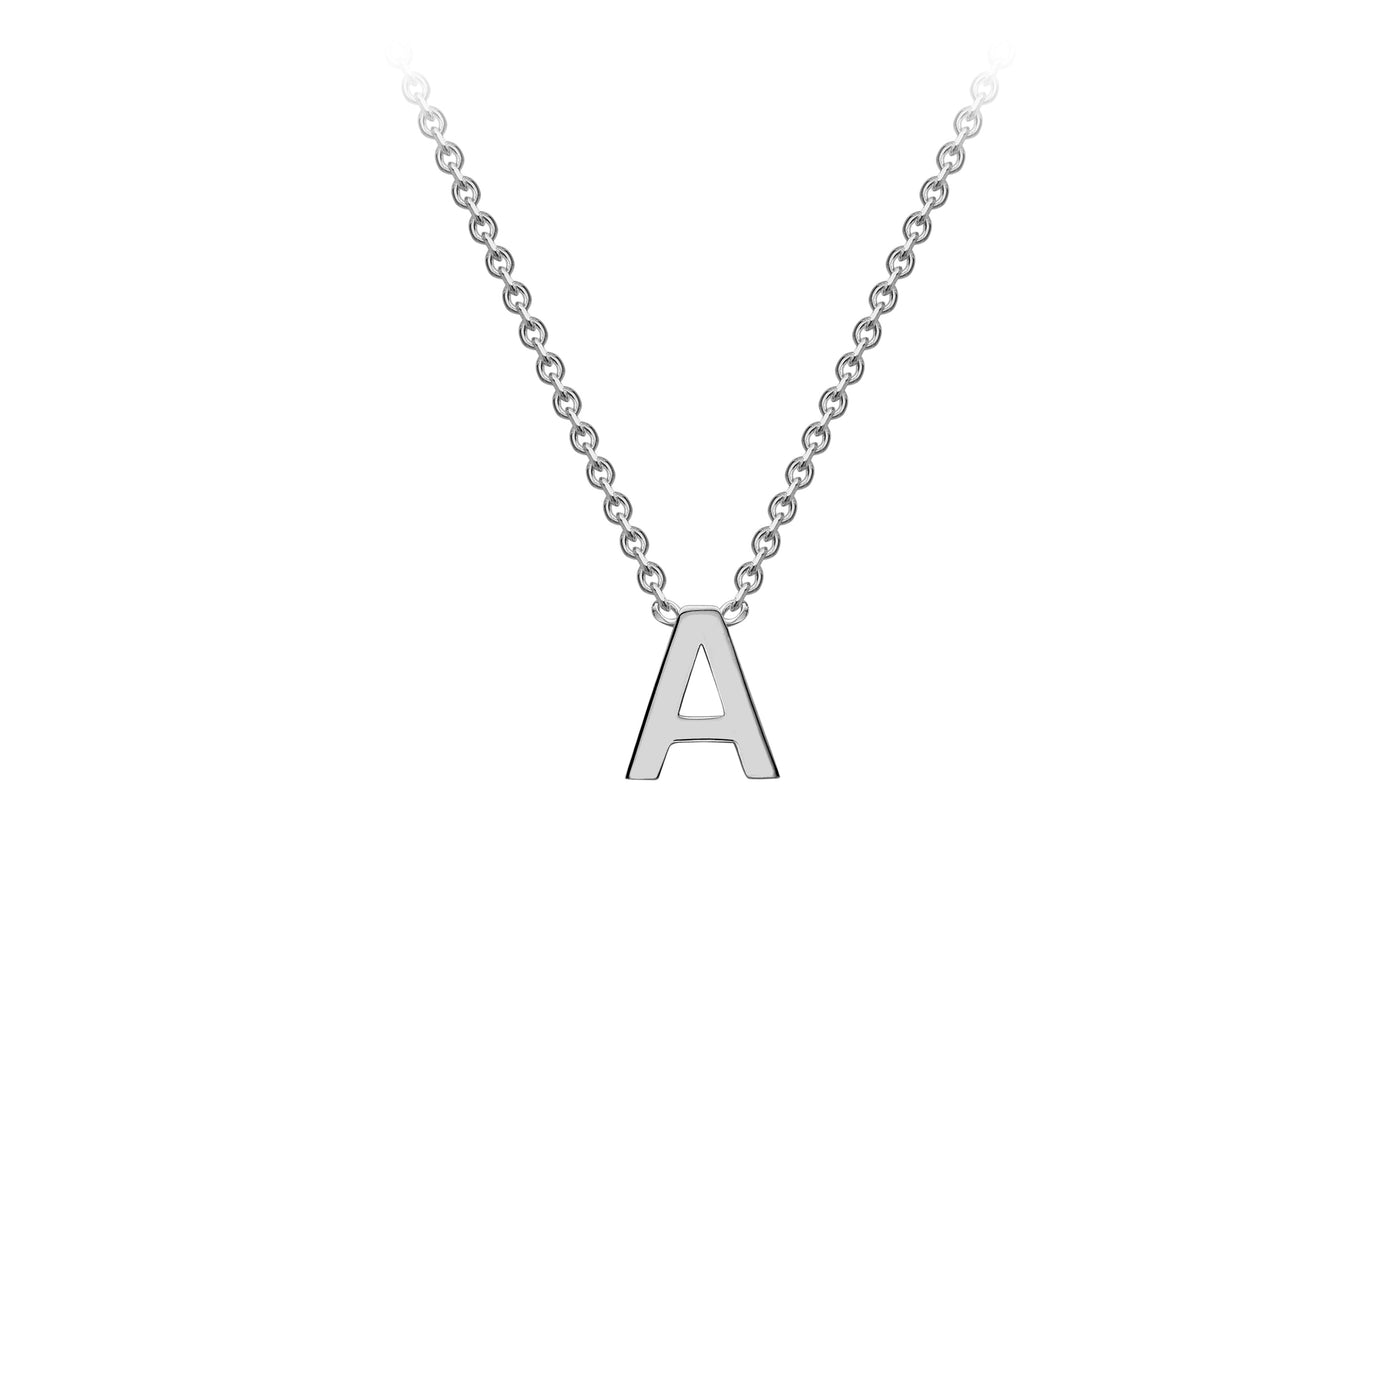 9K White Gold Initial Necklace 38cm/43cm